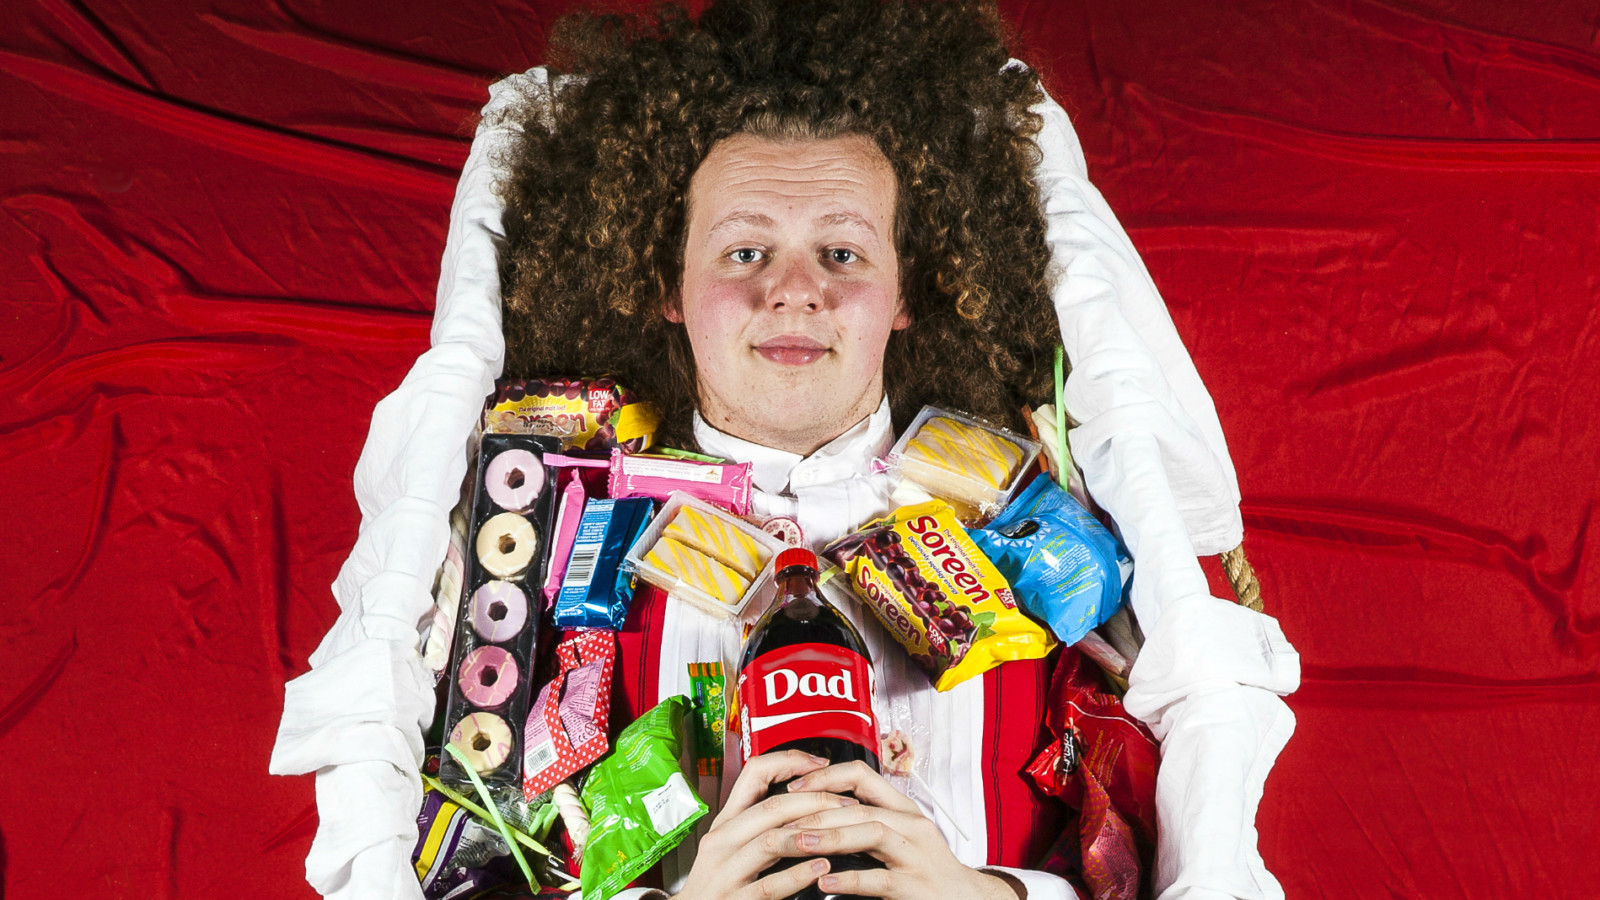 The artist Jack Rooke lies in a white lined coffin with various confectionary and holding a Coca Cola bottle with 'Dad' on the label.